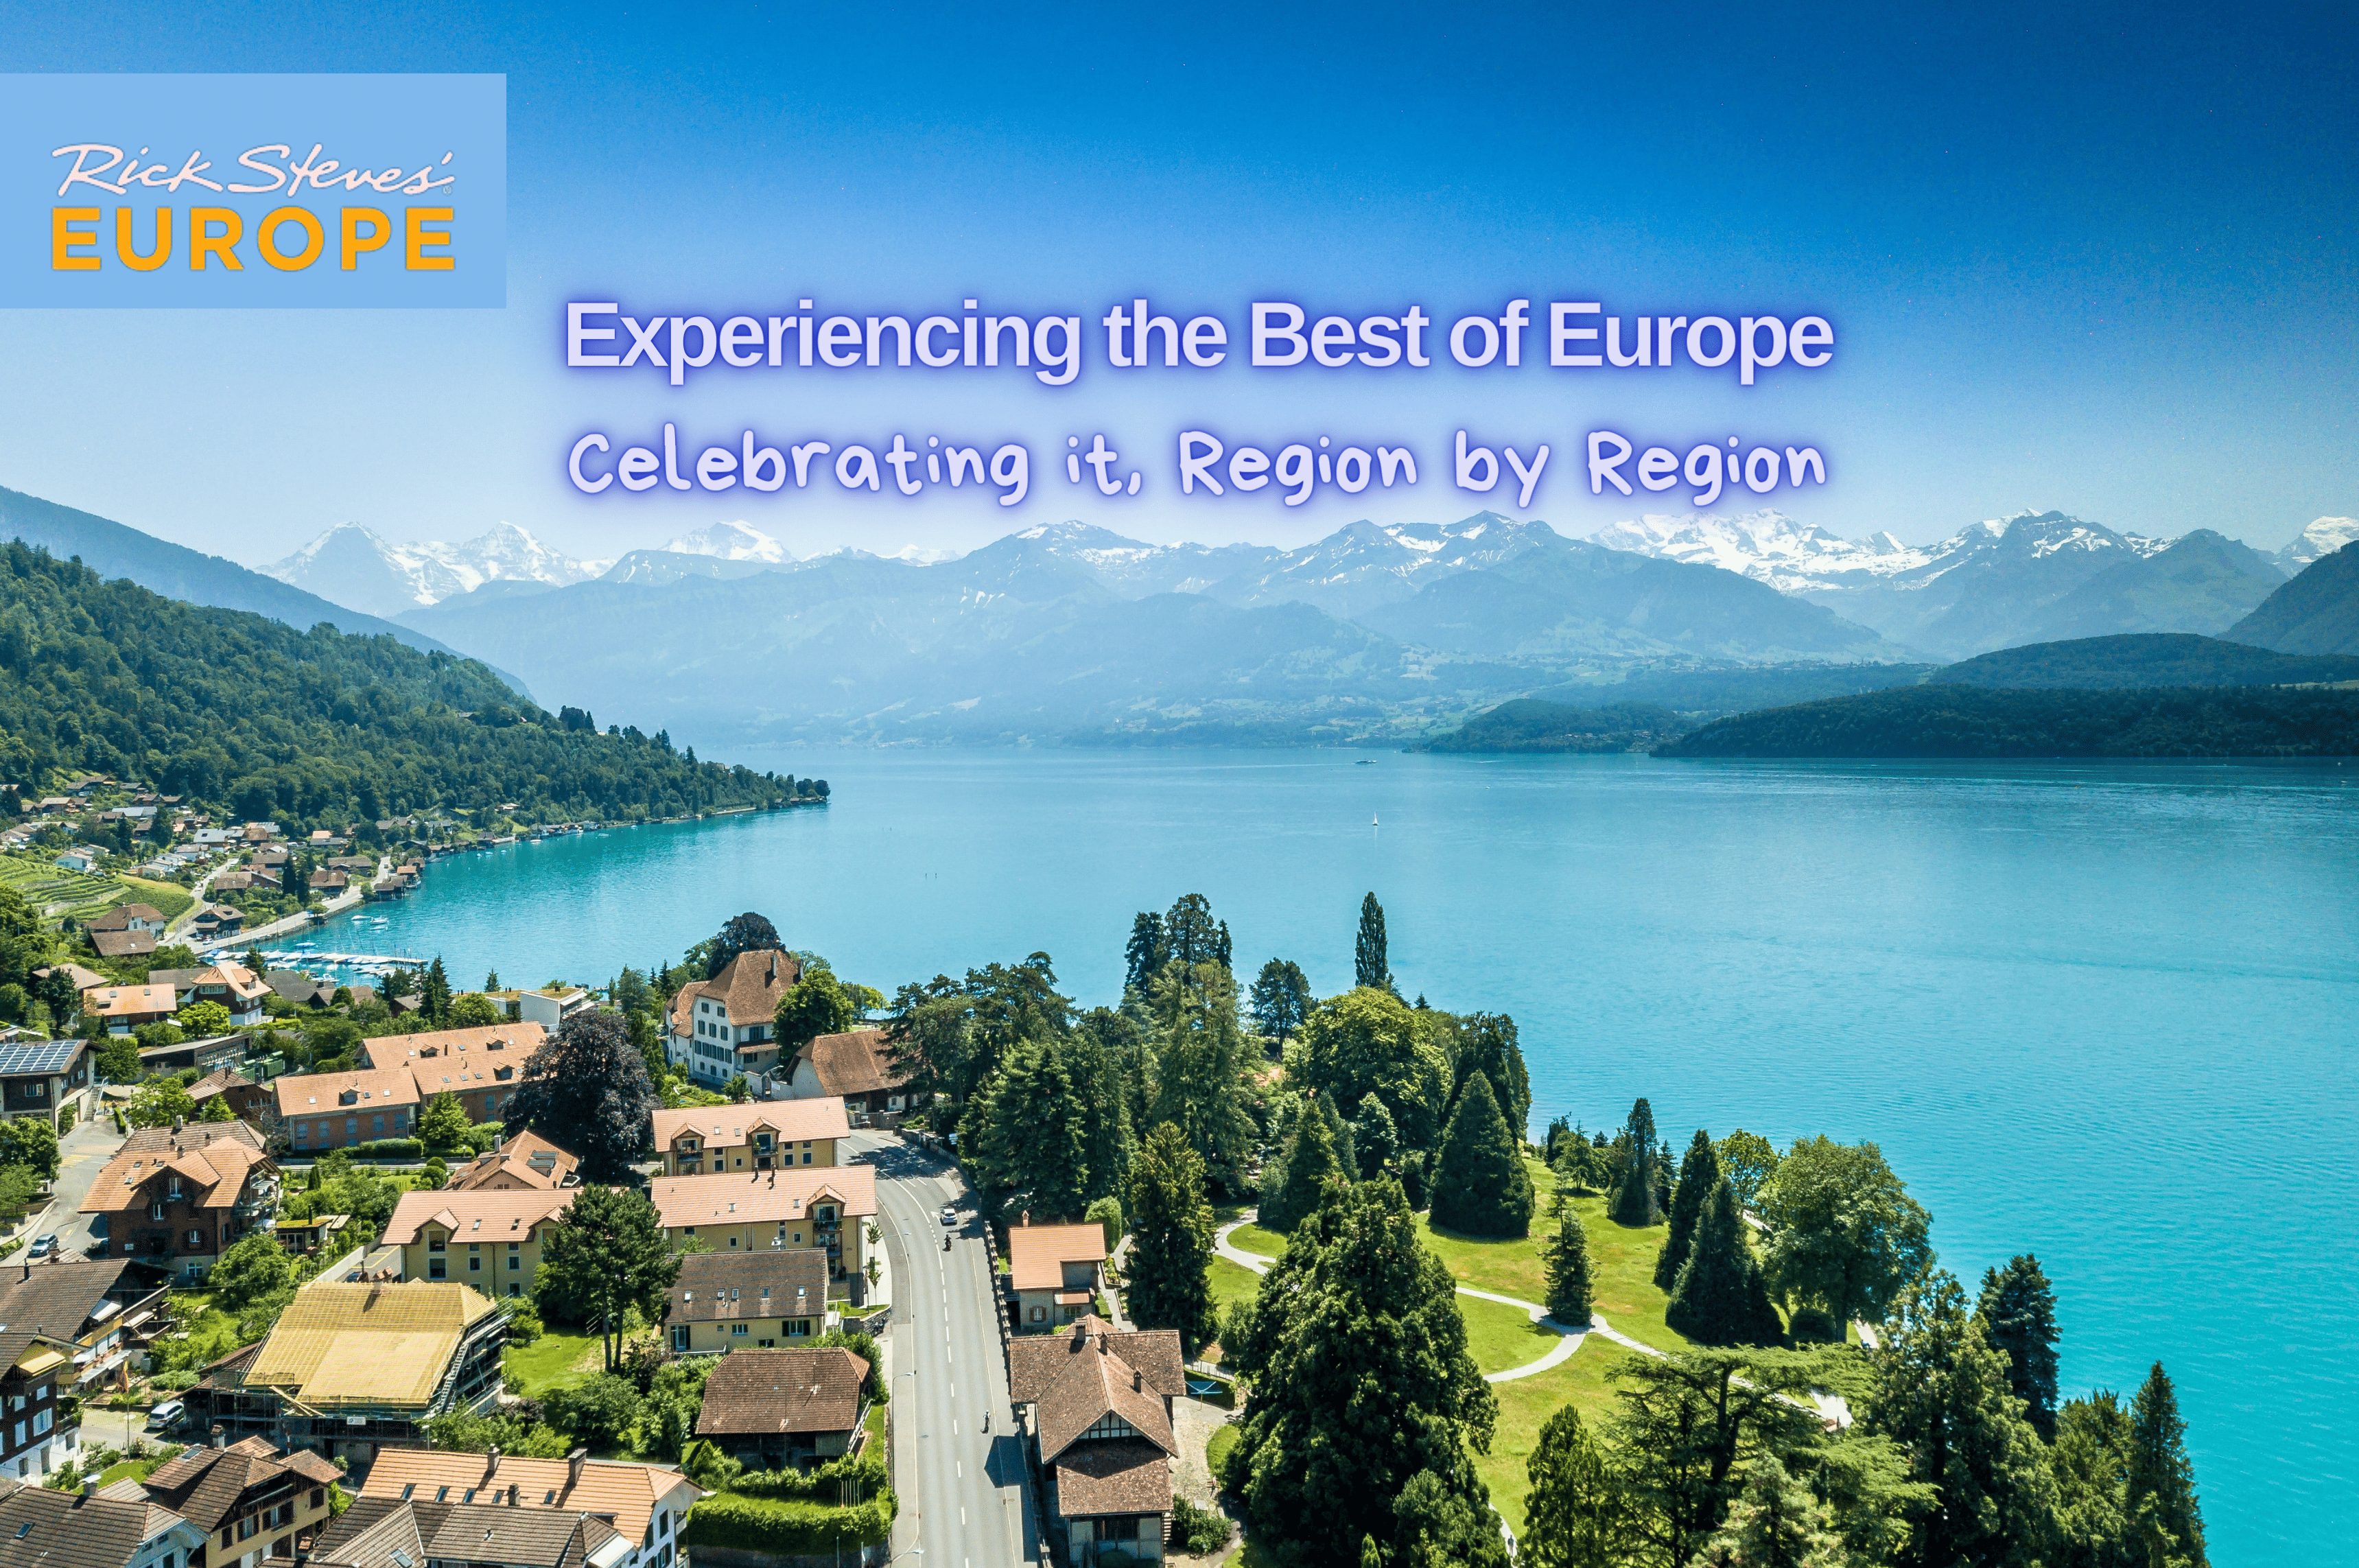 Is Rick Steves Europe Tour Operator worth it?: A Comprehensive Review